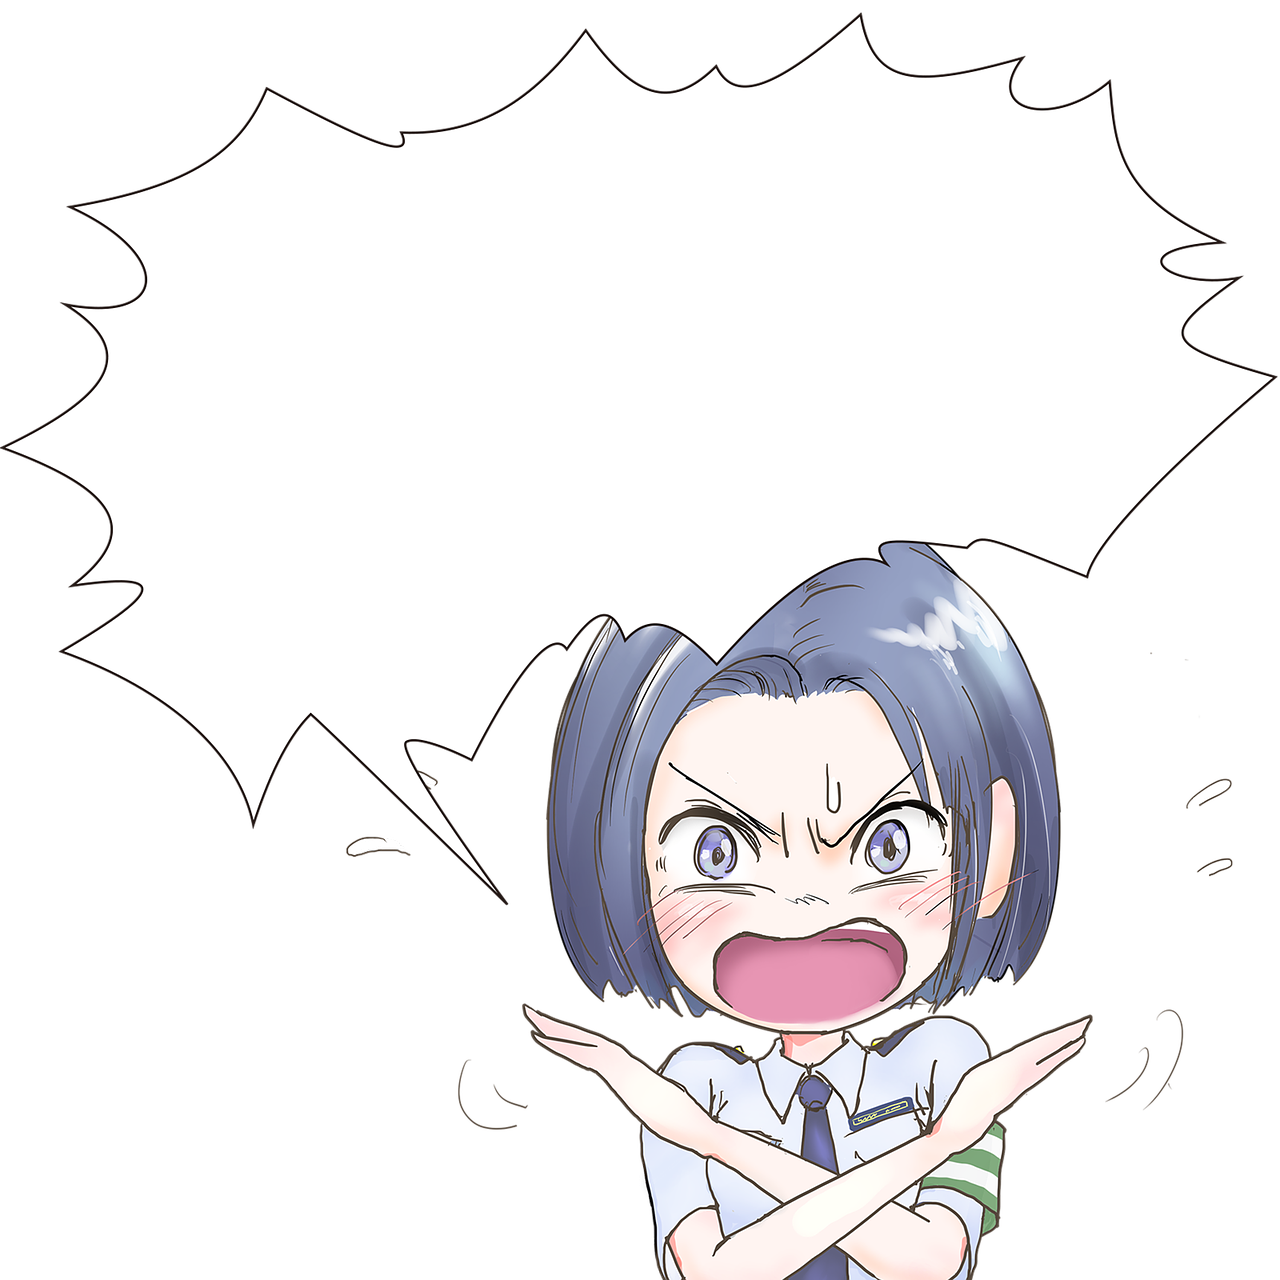 a close up of a person with a speech bubble, an anime drawing, mingei, little angry girl with blue hair, super super dynamic dynamic pose, yen press, uniform background